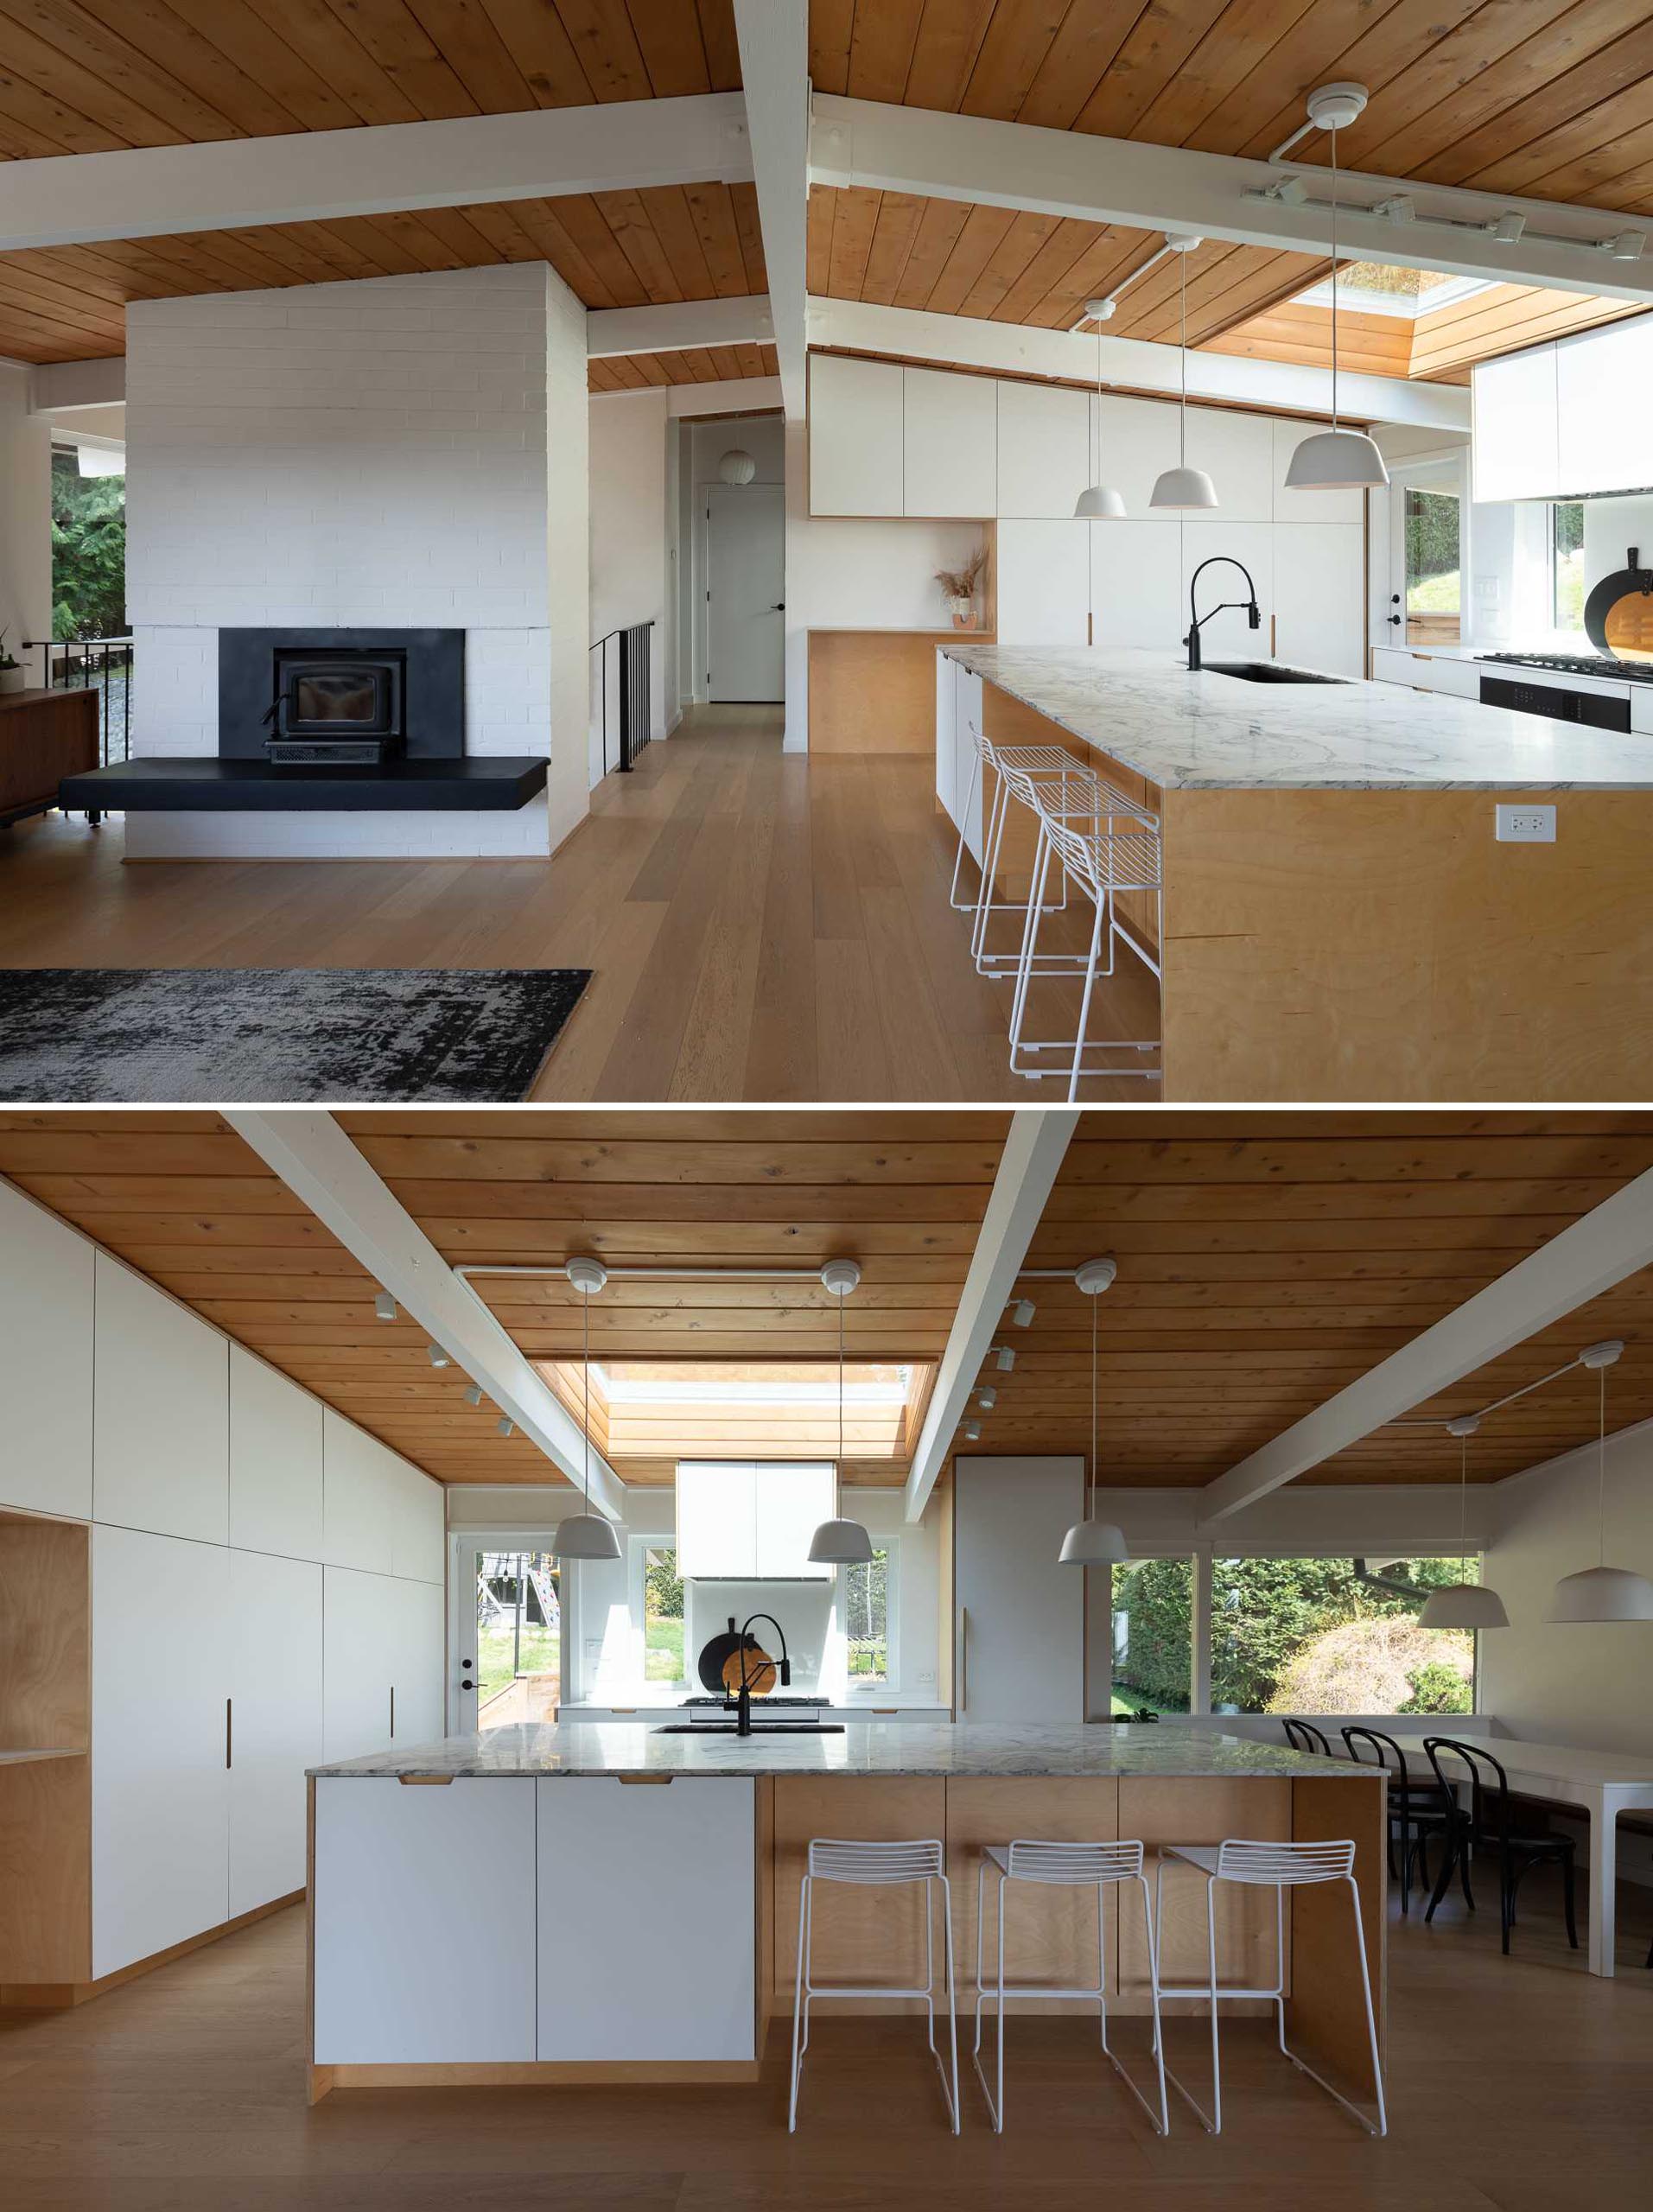 A remodeled kitchen with minimalist white cabinetry, and an oversized 10 foot by 5 foot marble topped kitchen island.